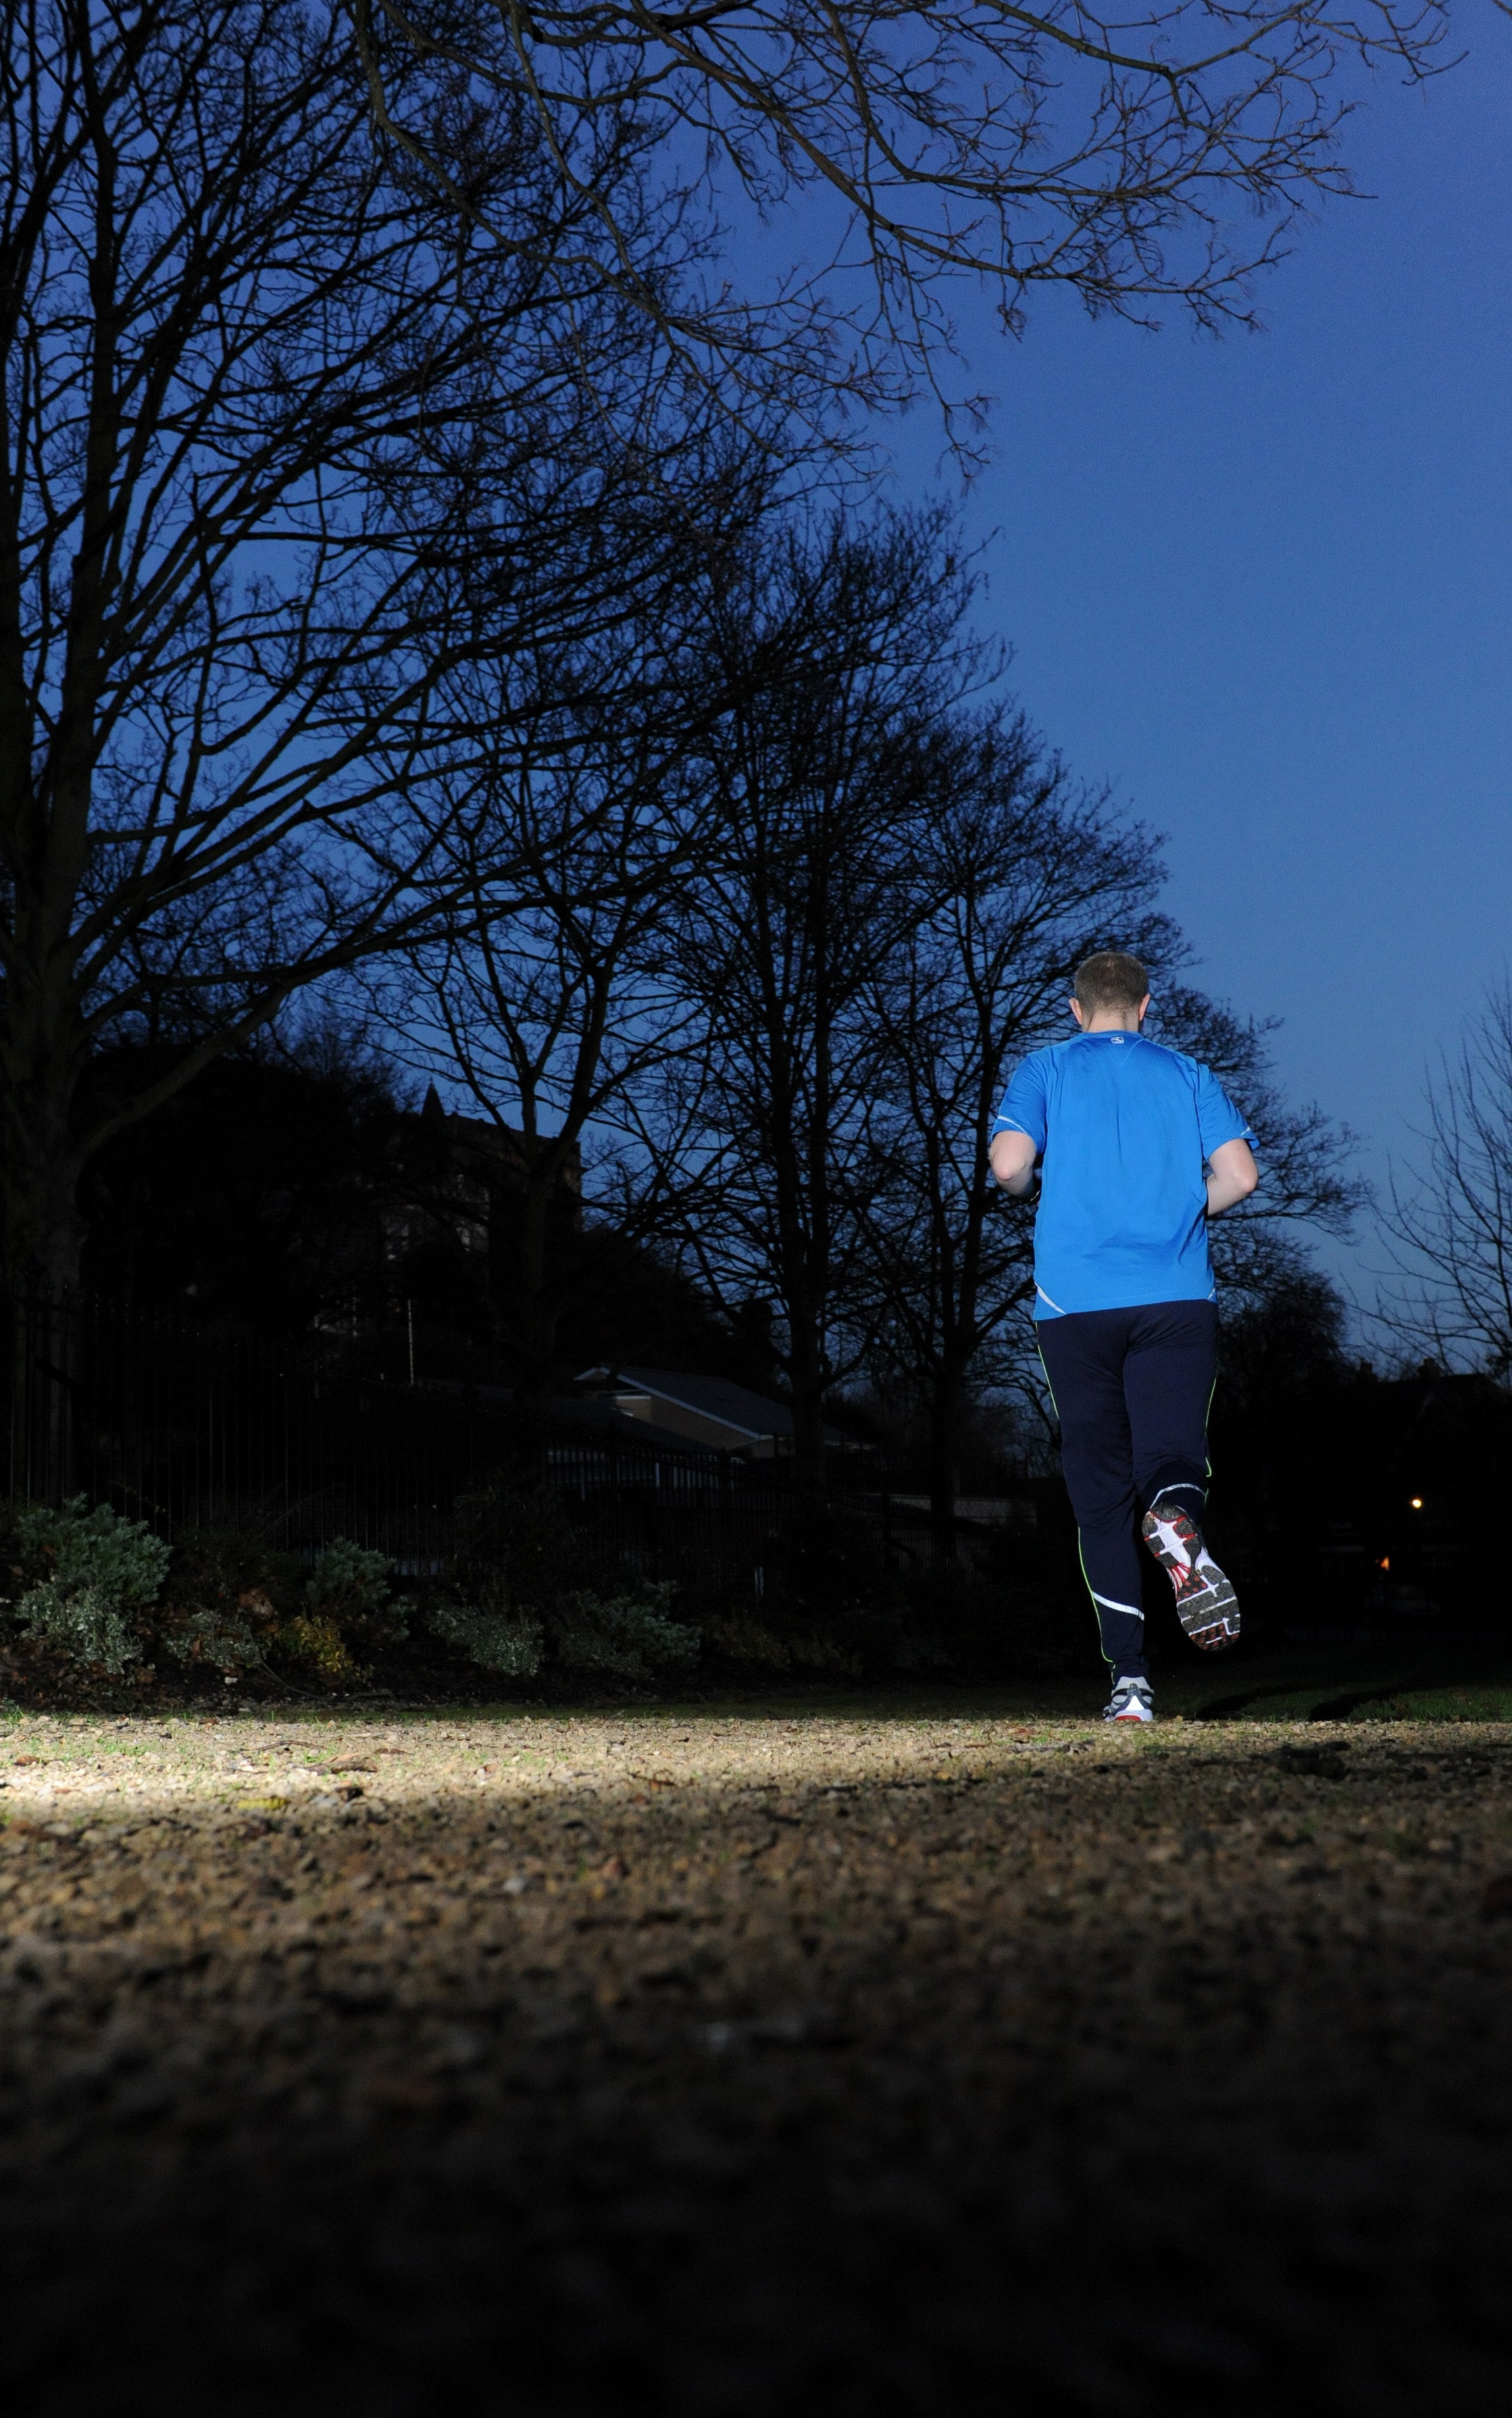 Runners prefer the same calorie saving pace, regardless of distance – study (Andrew Matthews/PA)